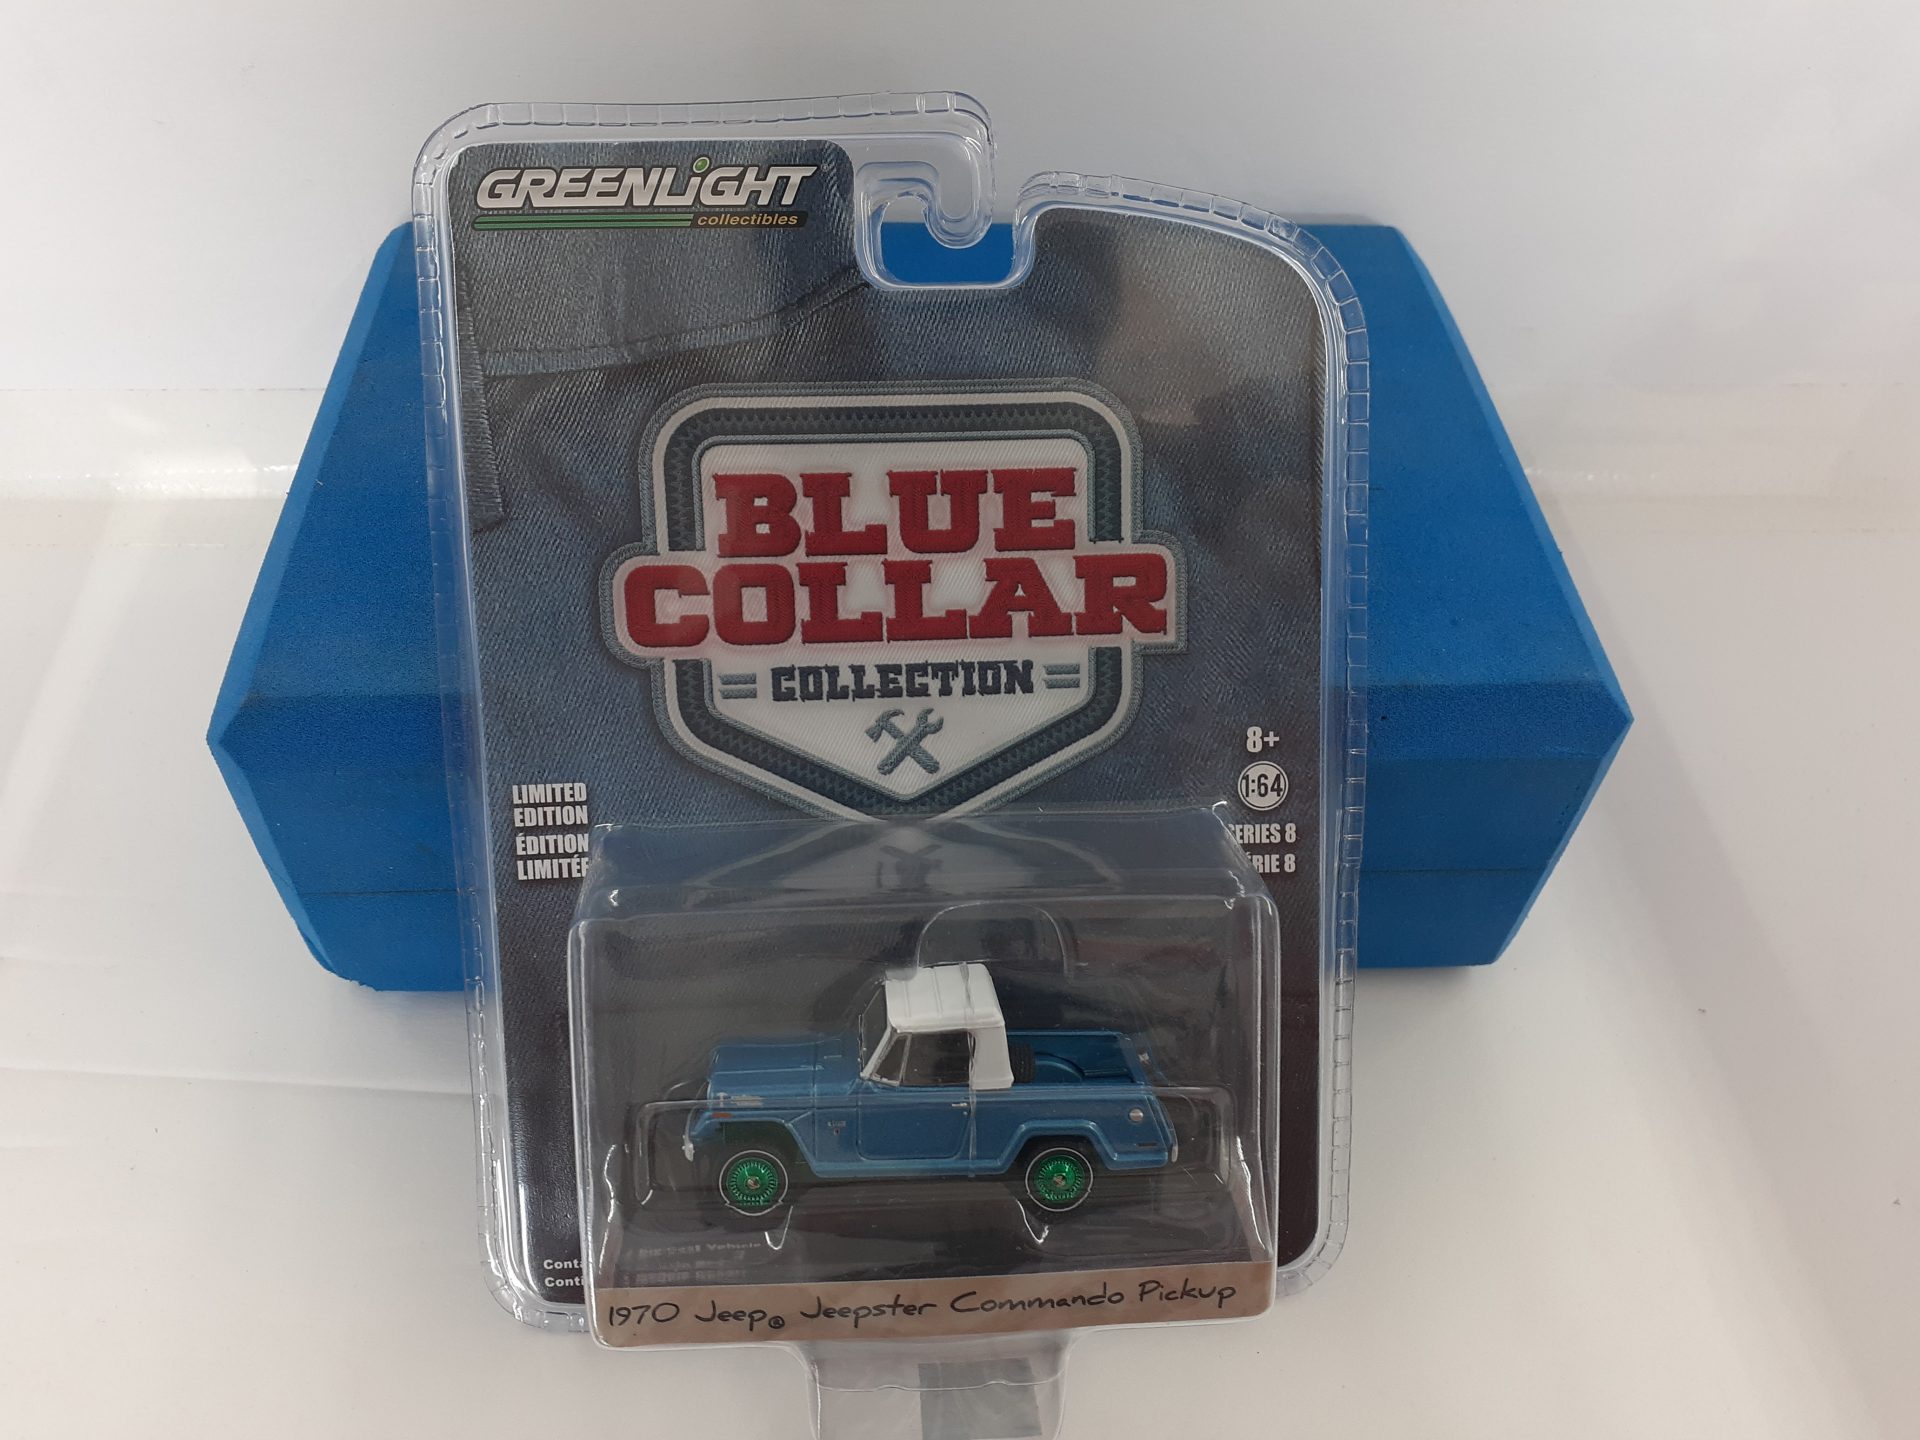 Greenlight 1:64 1970 Jeep jeepster Commando Pickup in Light Blue without Roof） 